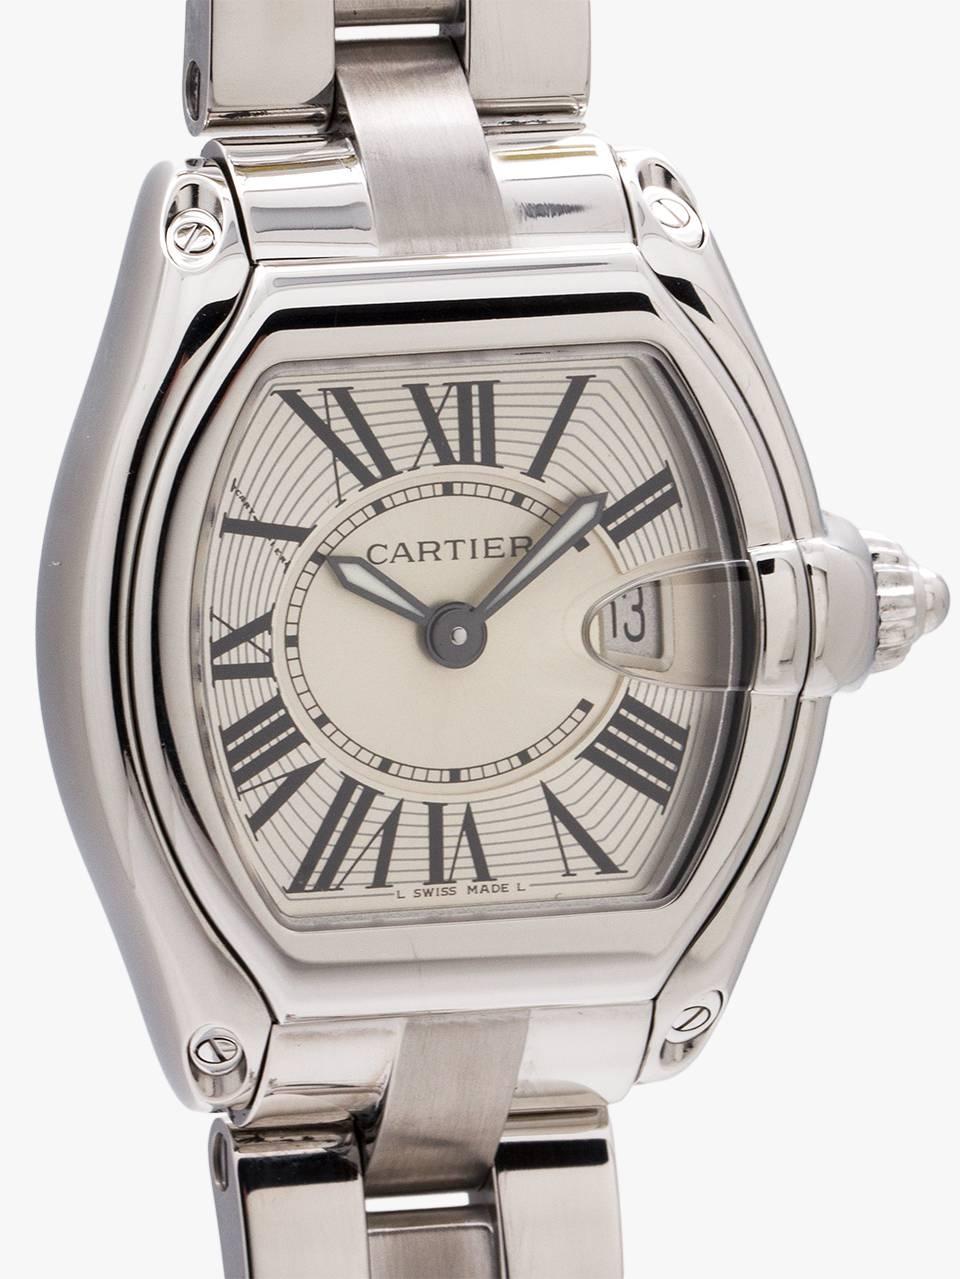 Cartier lady Roadster circa 2000’s. Featuring 31 x 37mm tonneau shaped case with sapphire crystal and date at 3 o’clock. With classic stretch Roman figures dial, with 2 tone silvered dial. Battery powered quartz movement. With luminous sword style